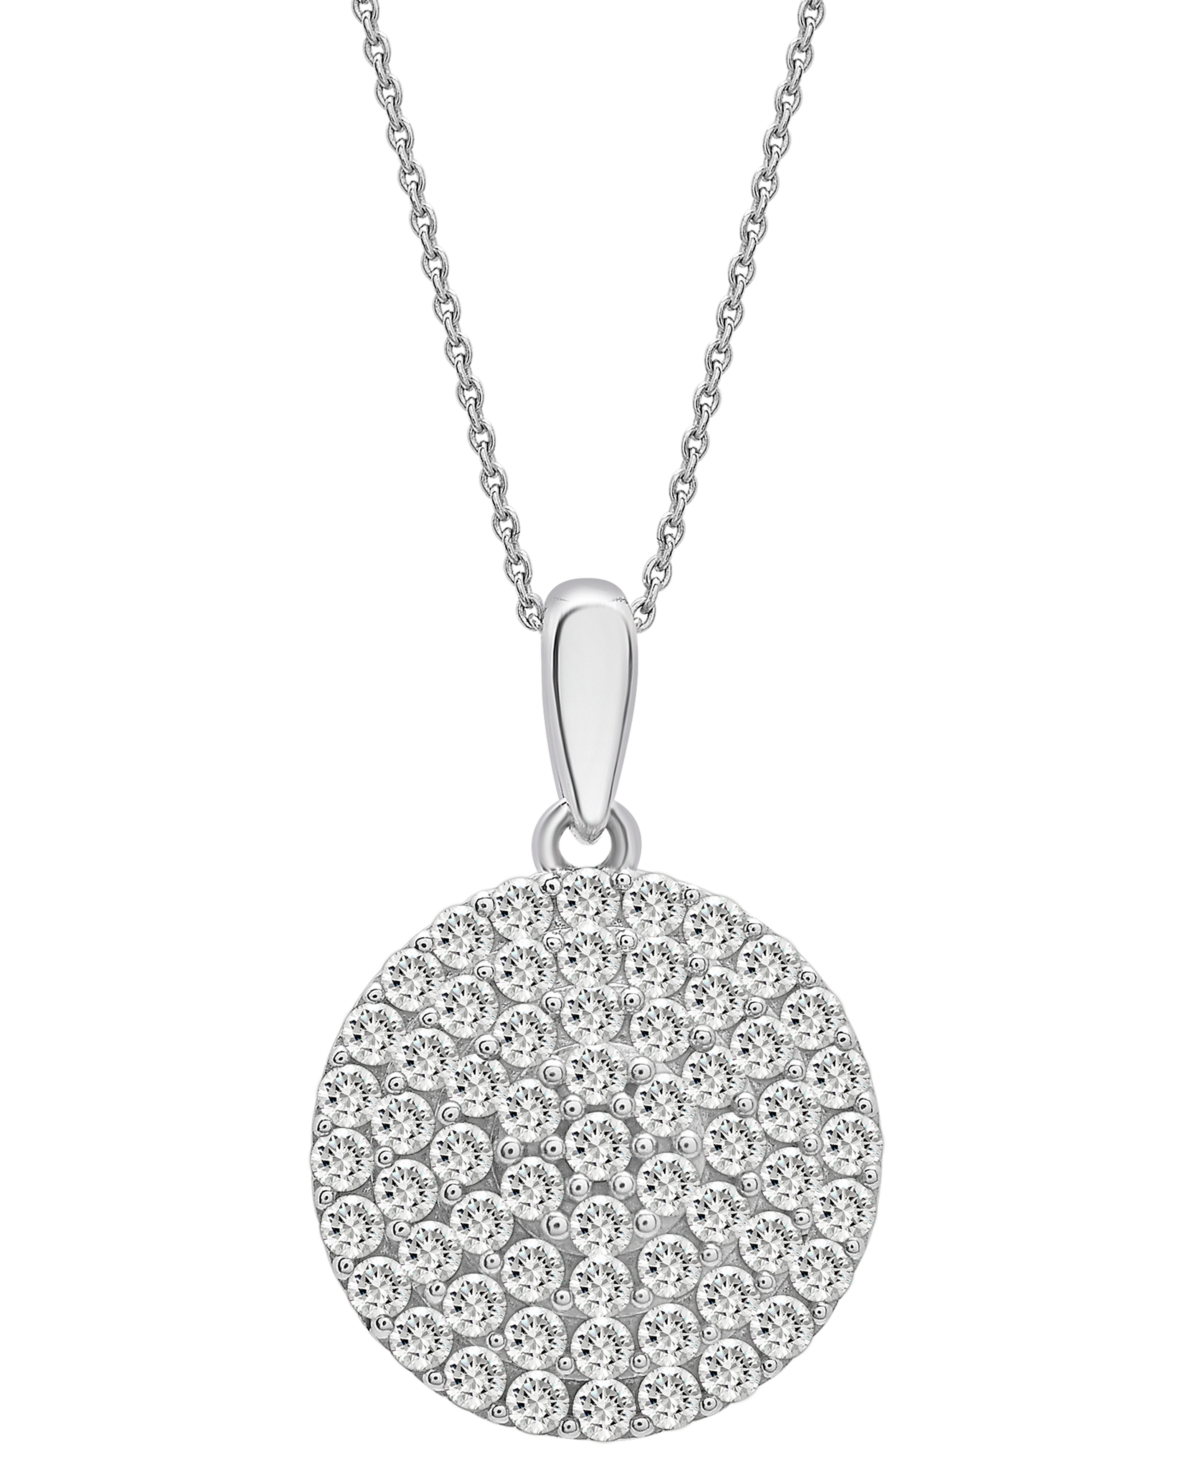 Diamond Circle Pendant Necklace (1 ct. t.w.) in 14k White Gold, 16" + 4" extender, Created for Macy's - White Gold